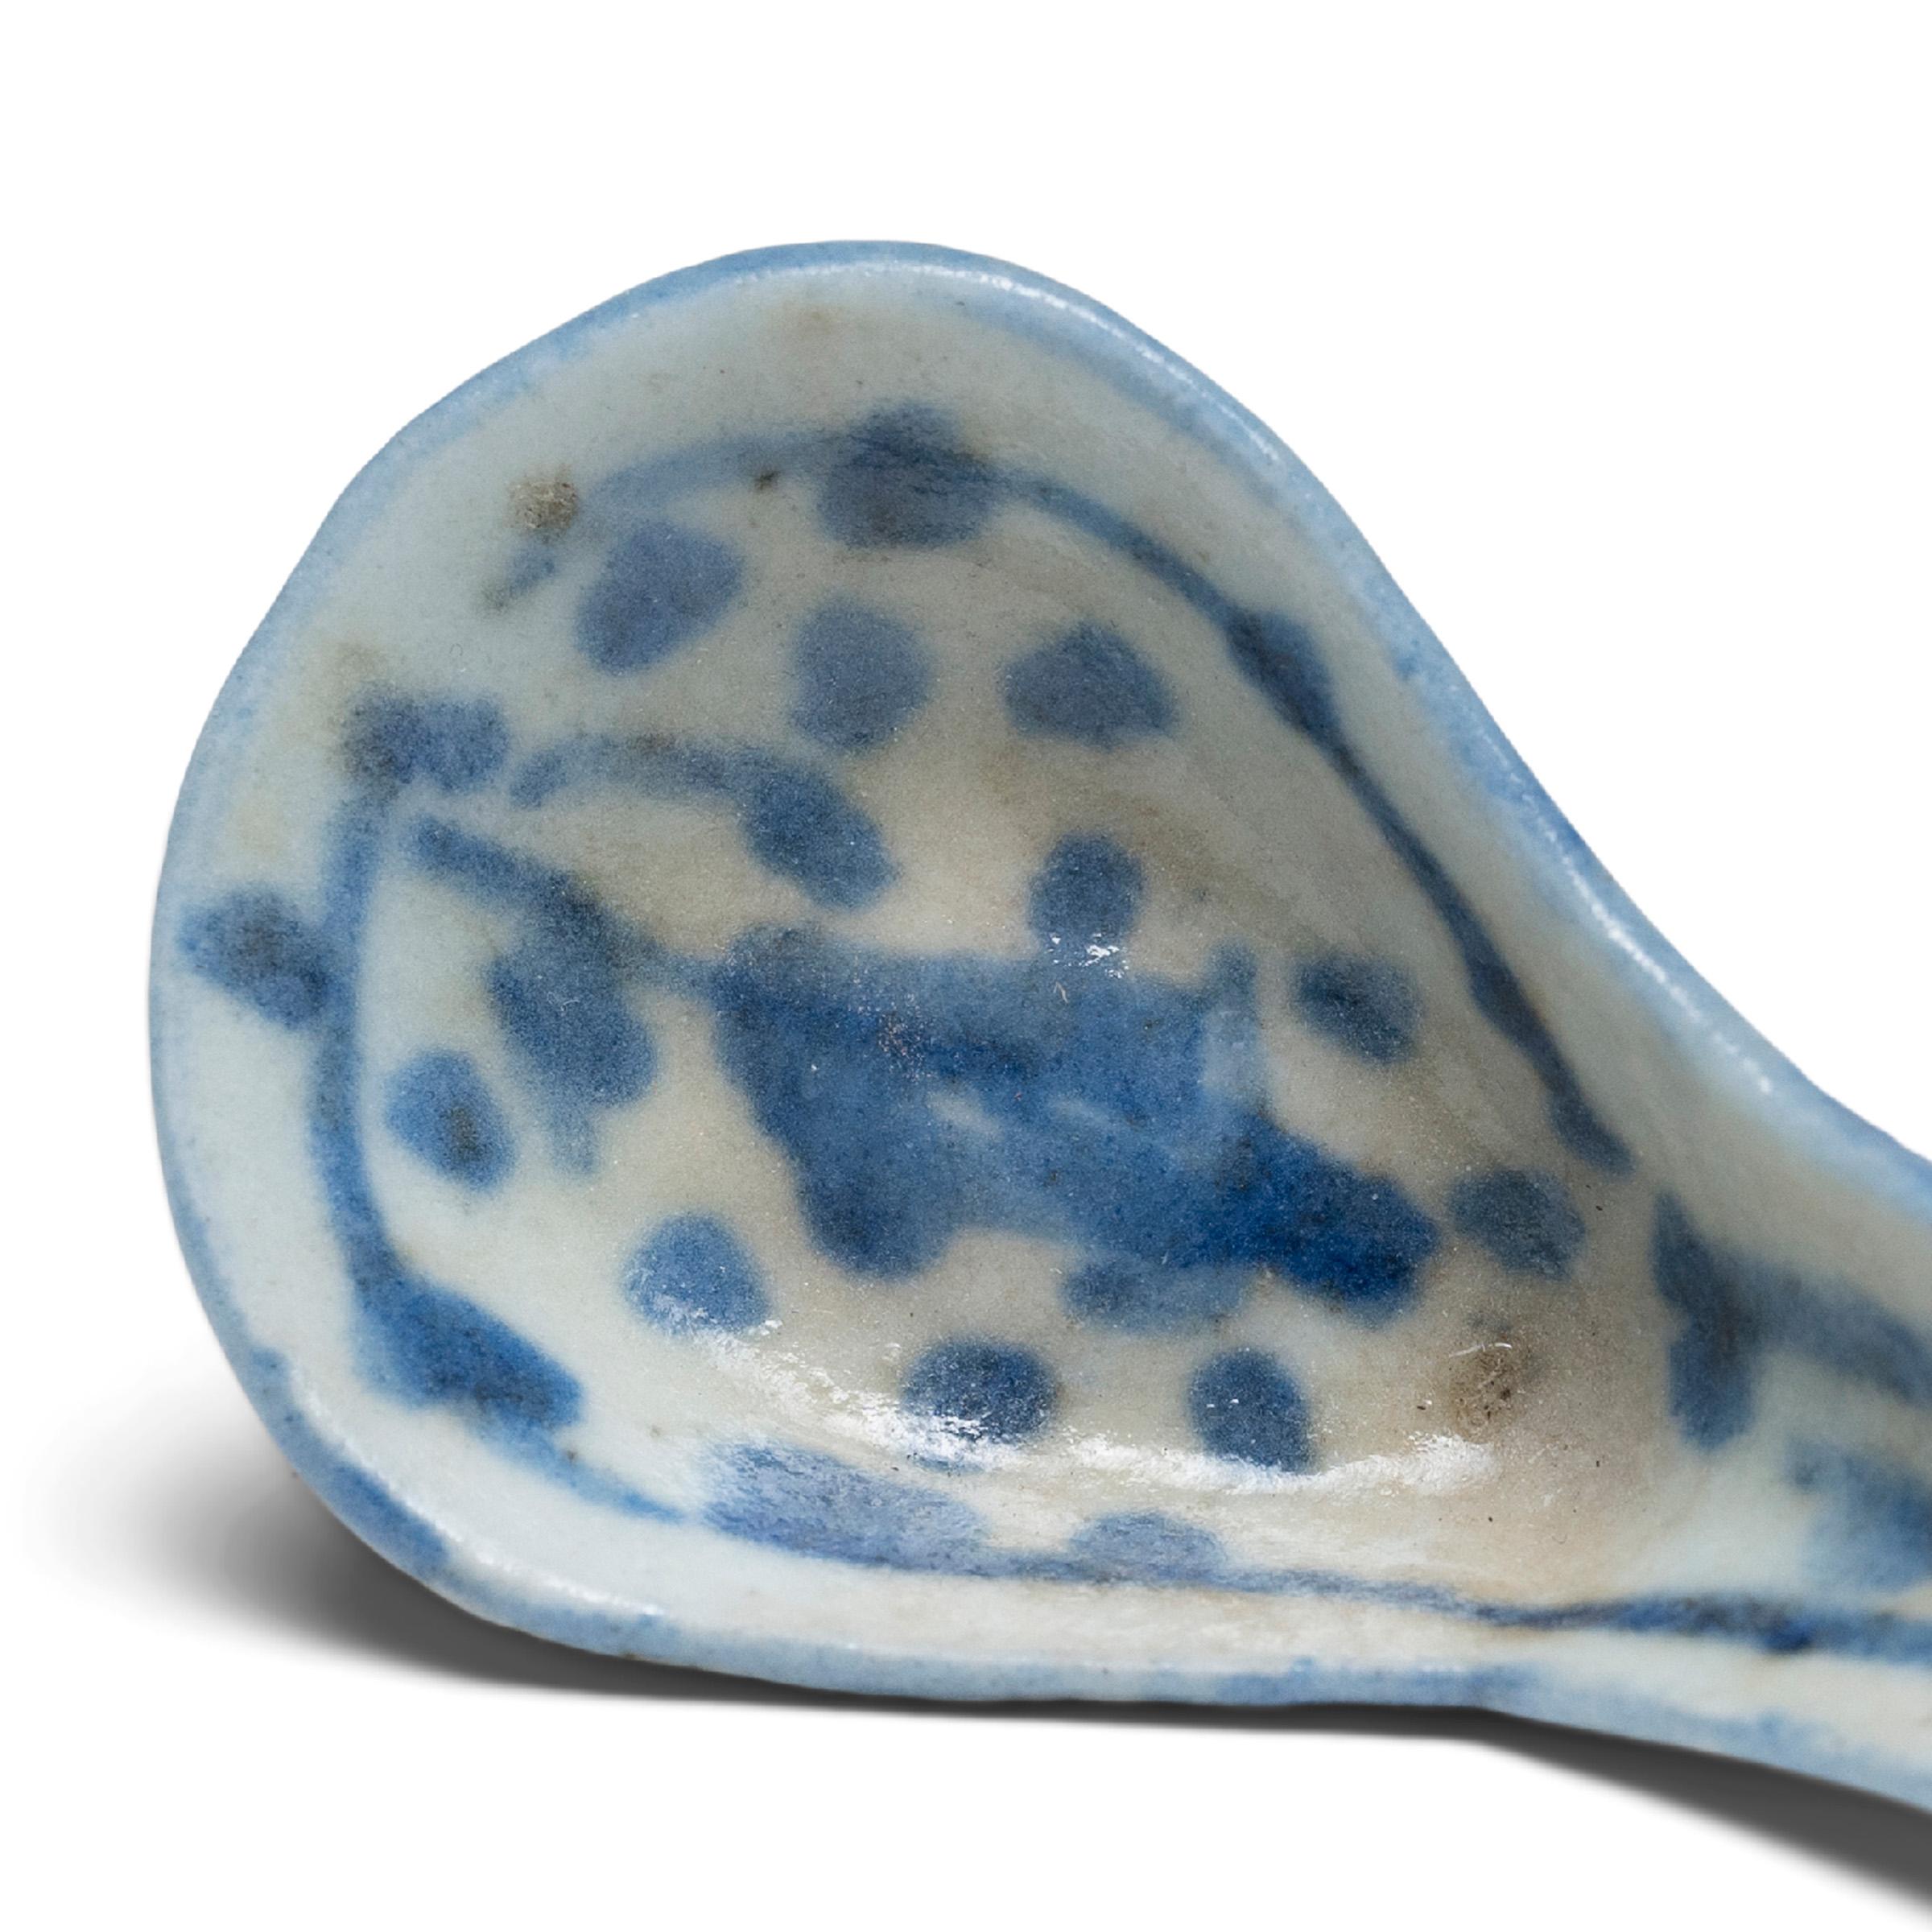 Qing Chinese Blue and White Spoon, c. 1850